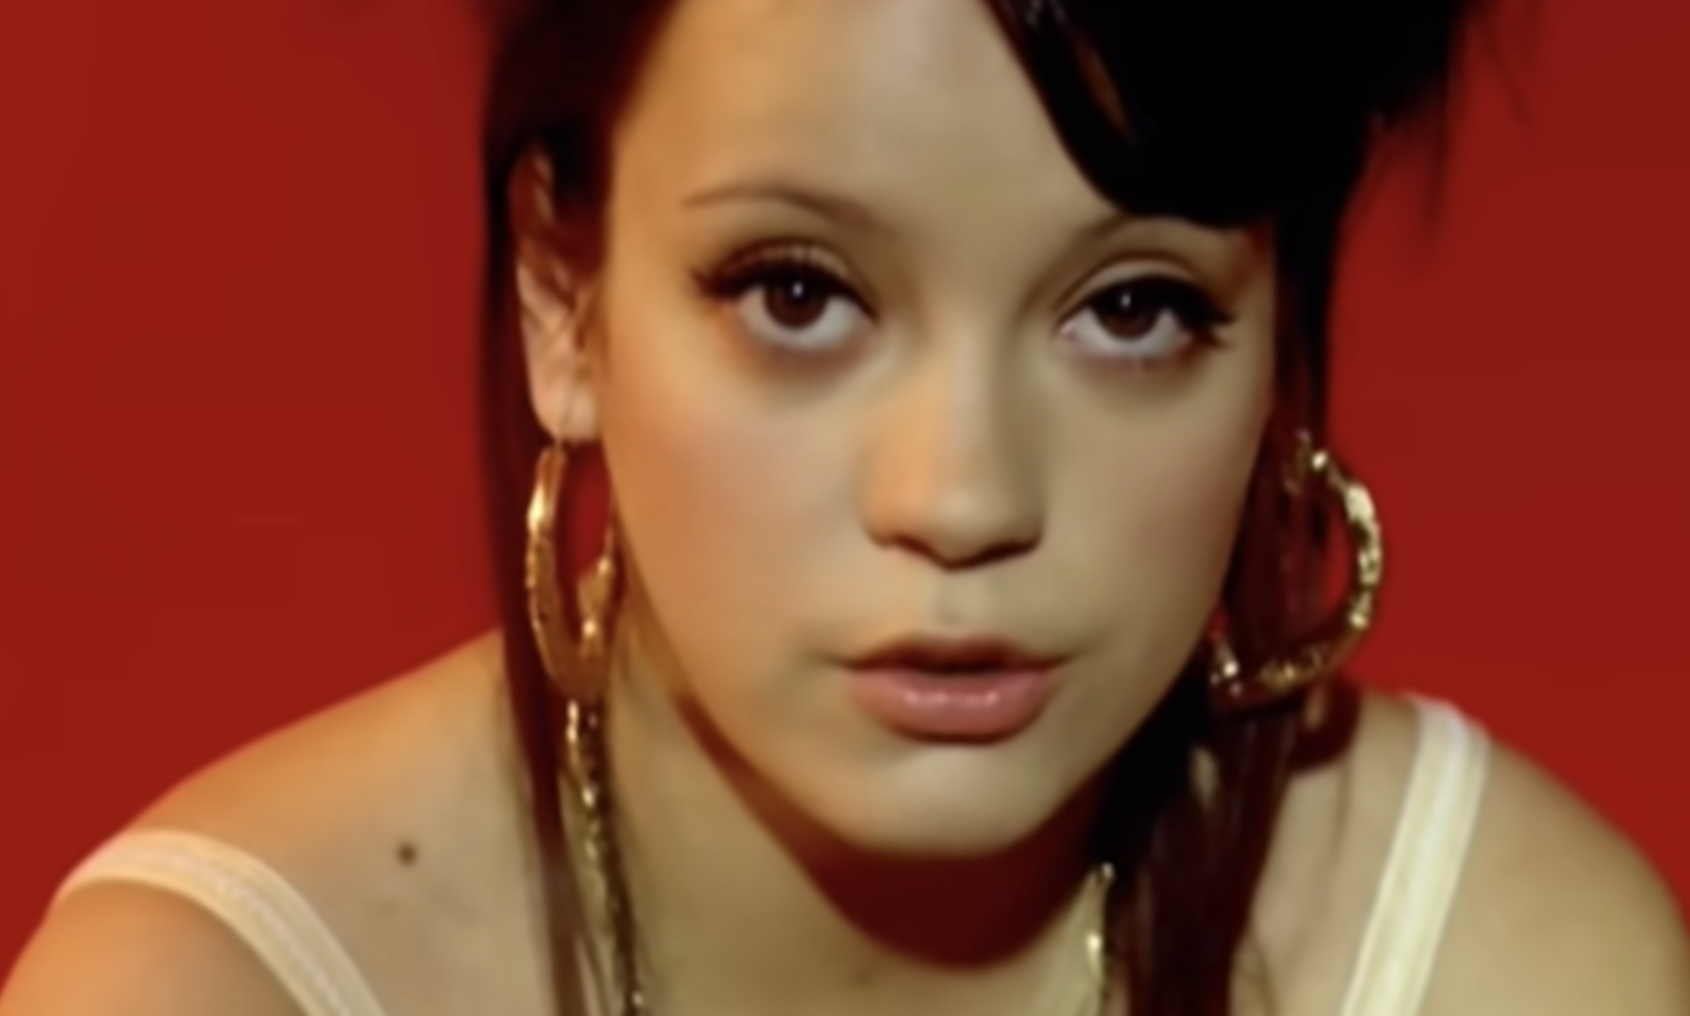 Lily Allen in her &quot;Smile&quot; music video